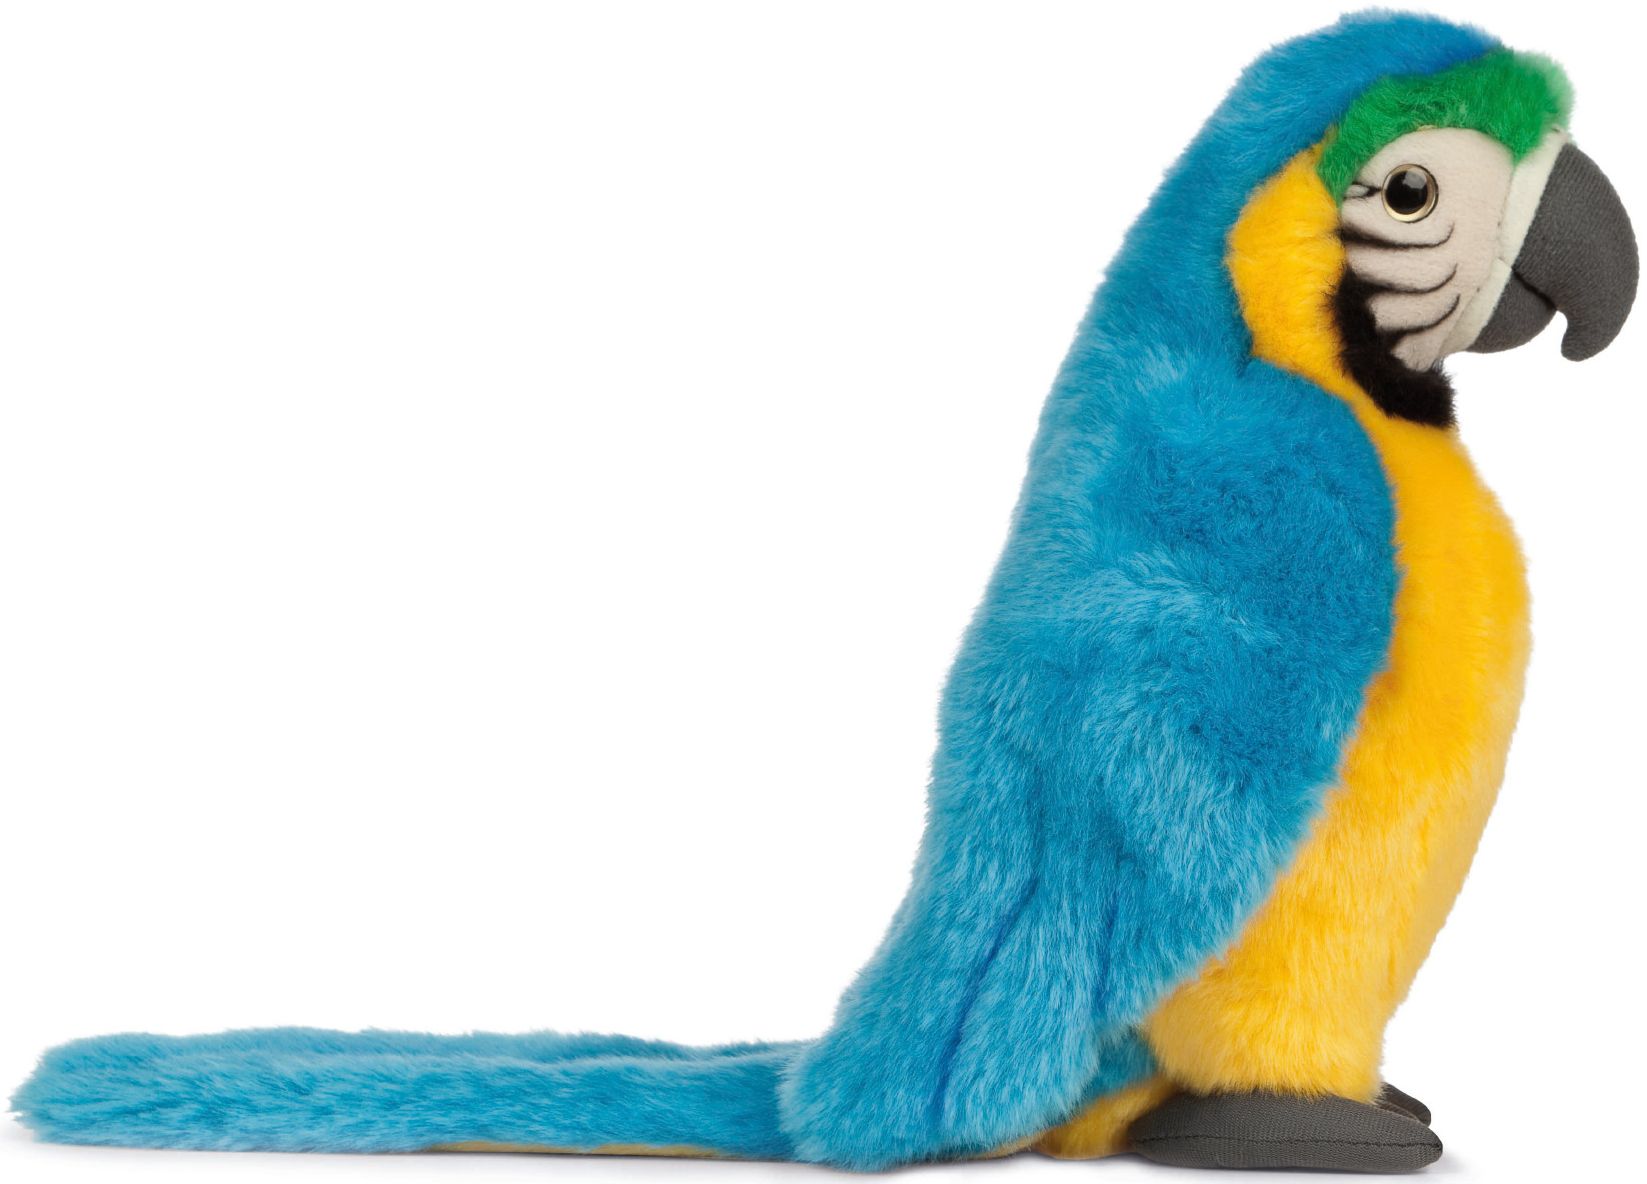 Living Nature Macaw – Blue